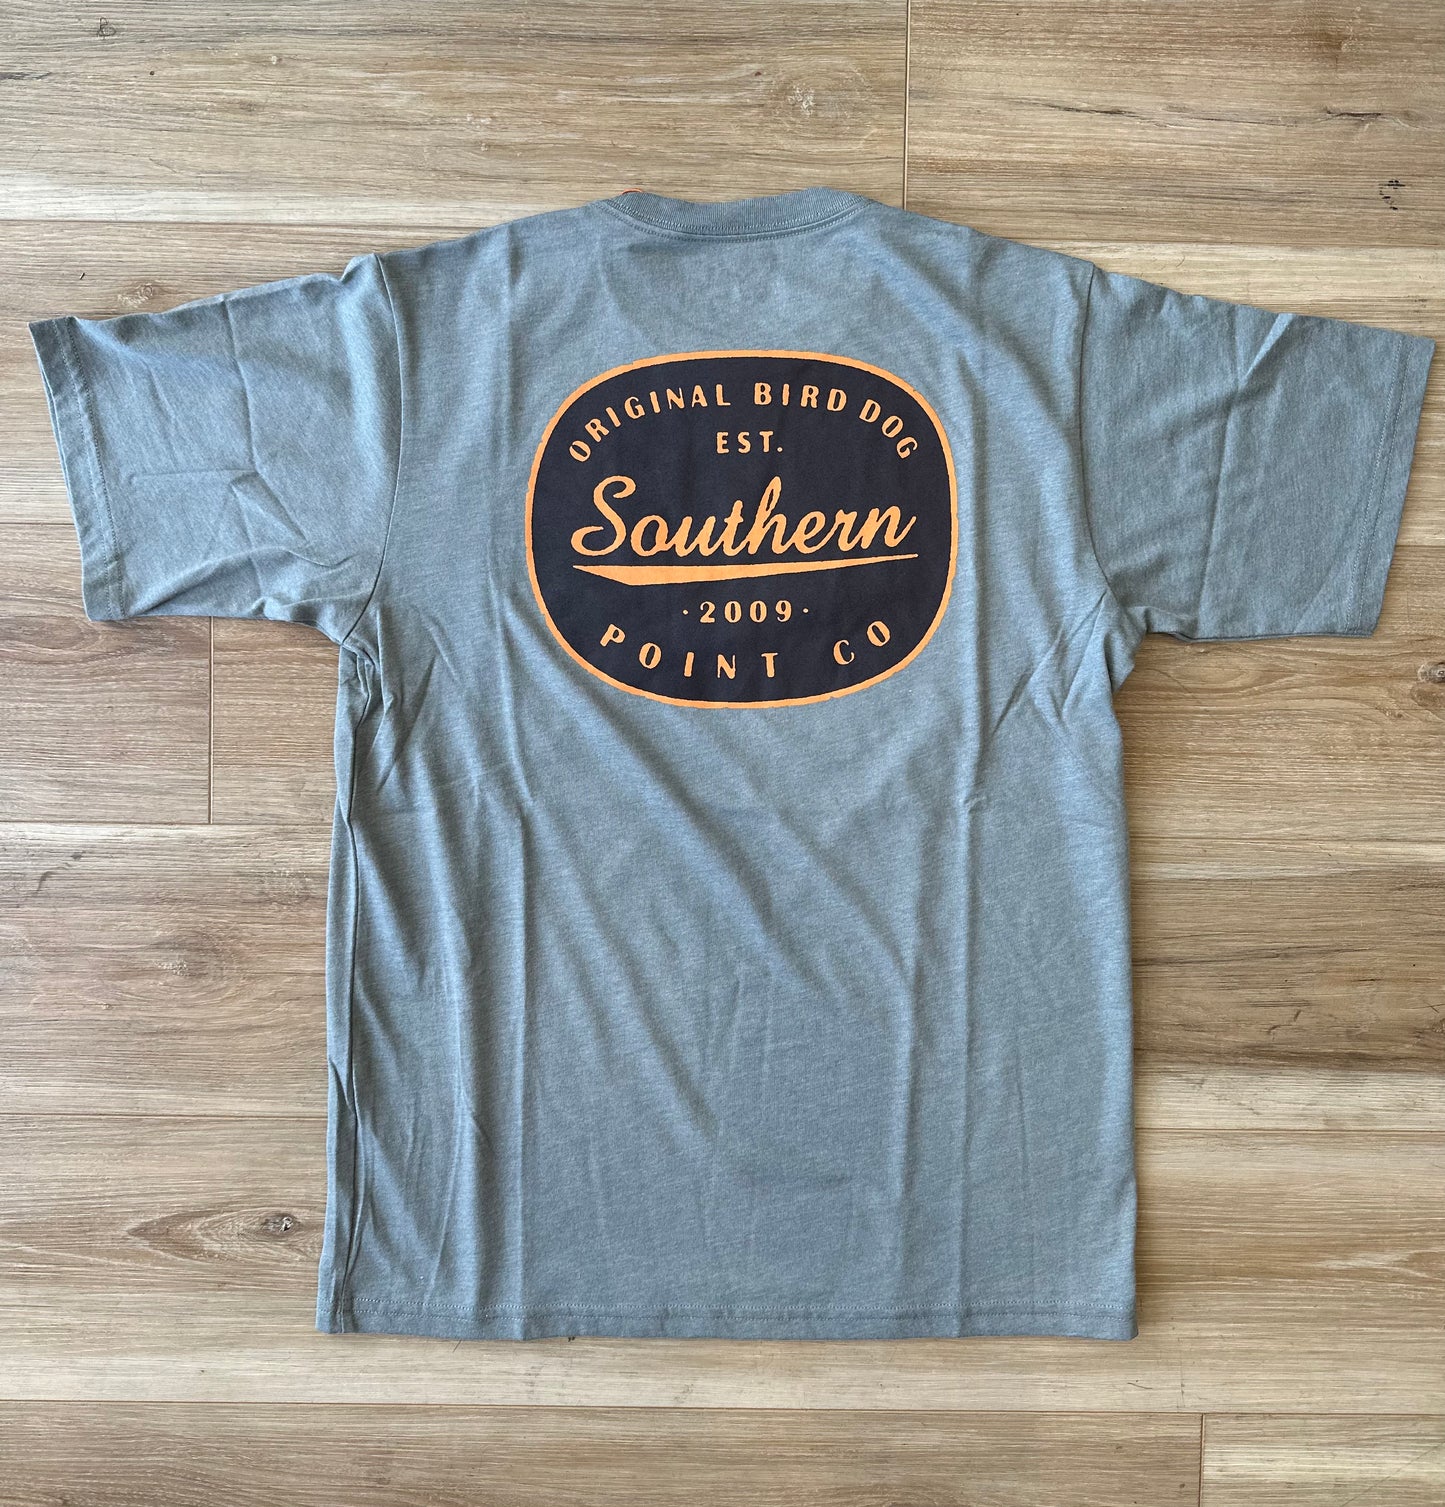 Southern Point- Simple Design